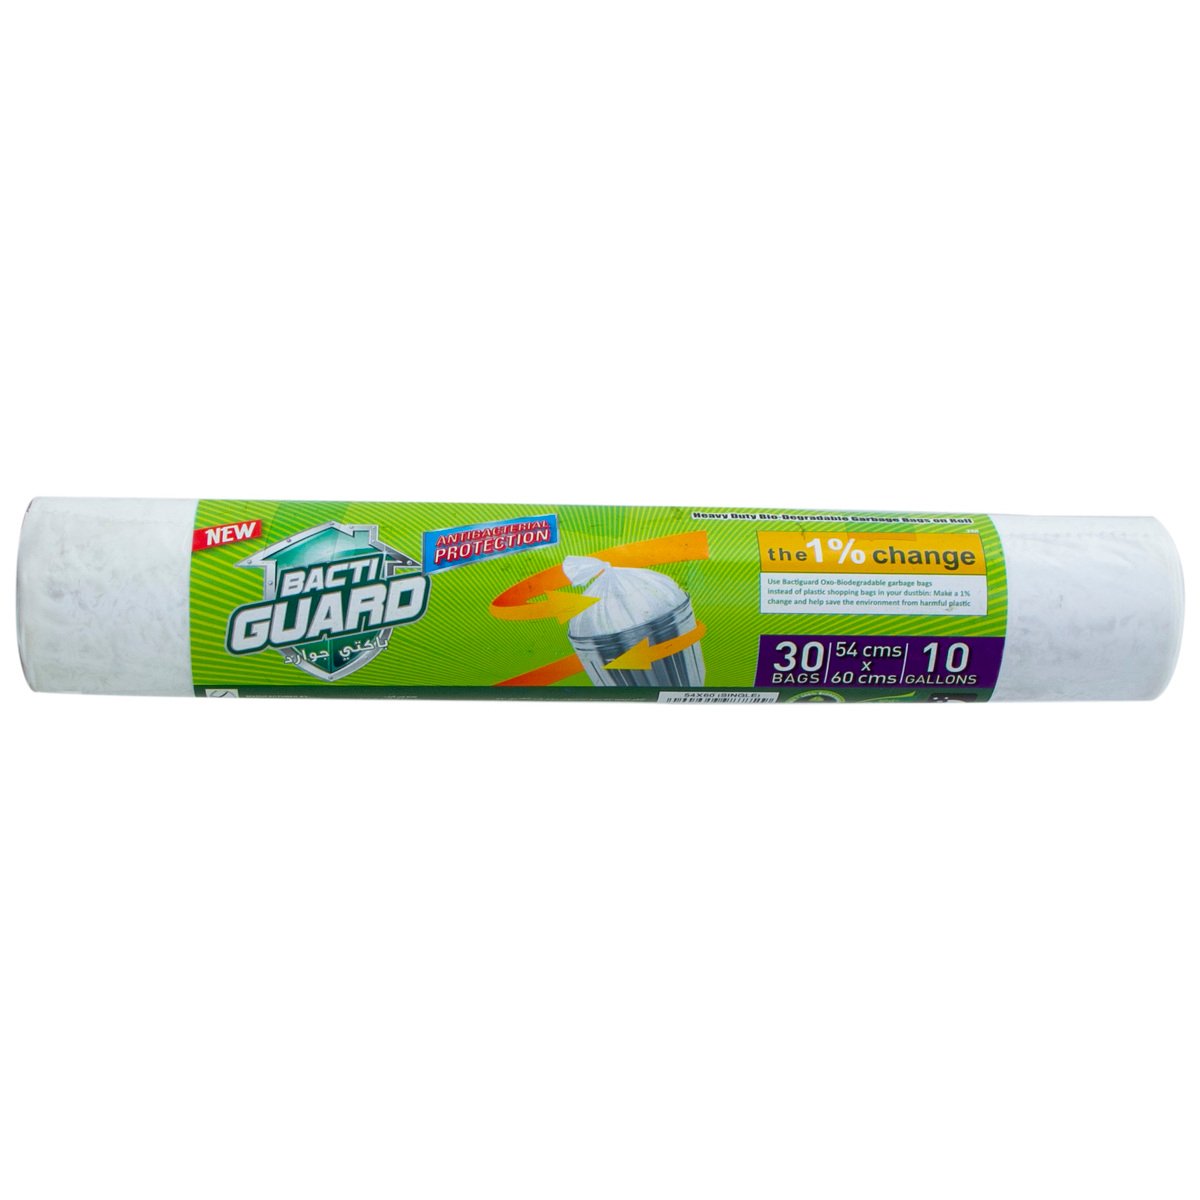 Bacti Guard Anti Bacterial Protection HD Biodegradable Garbage Bags 10 Gallons Size 54 x 60cm 30pcs